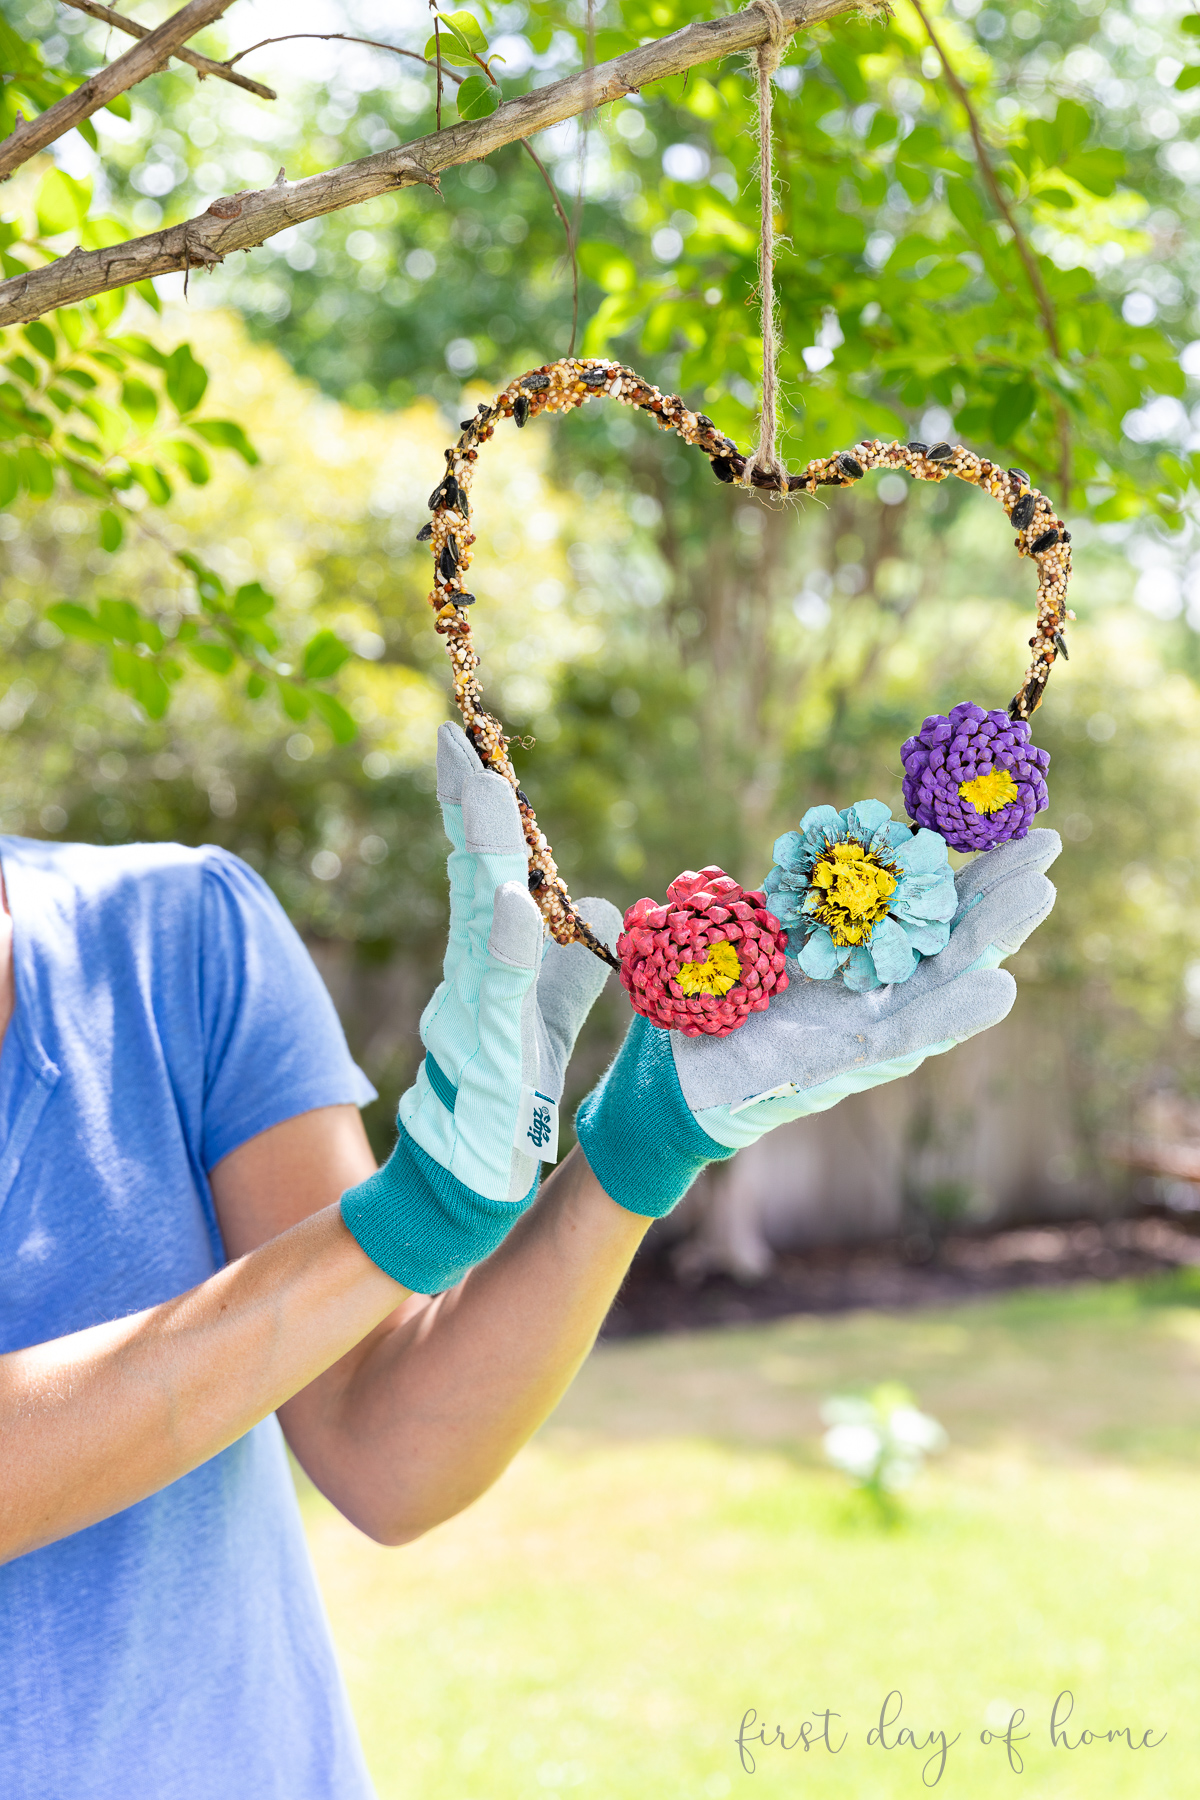 DIY bird feeder craft hanging from tree with Crissy holding the wreath from the bottom